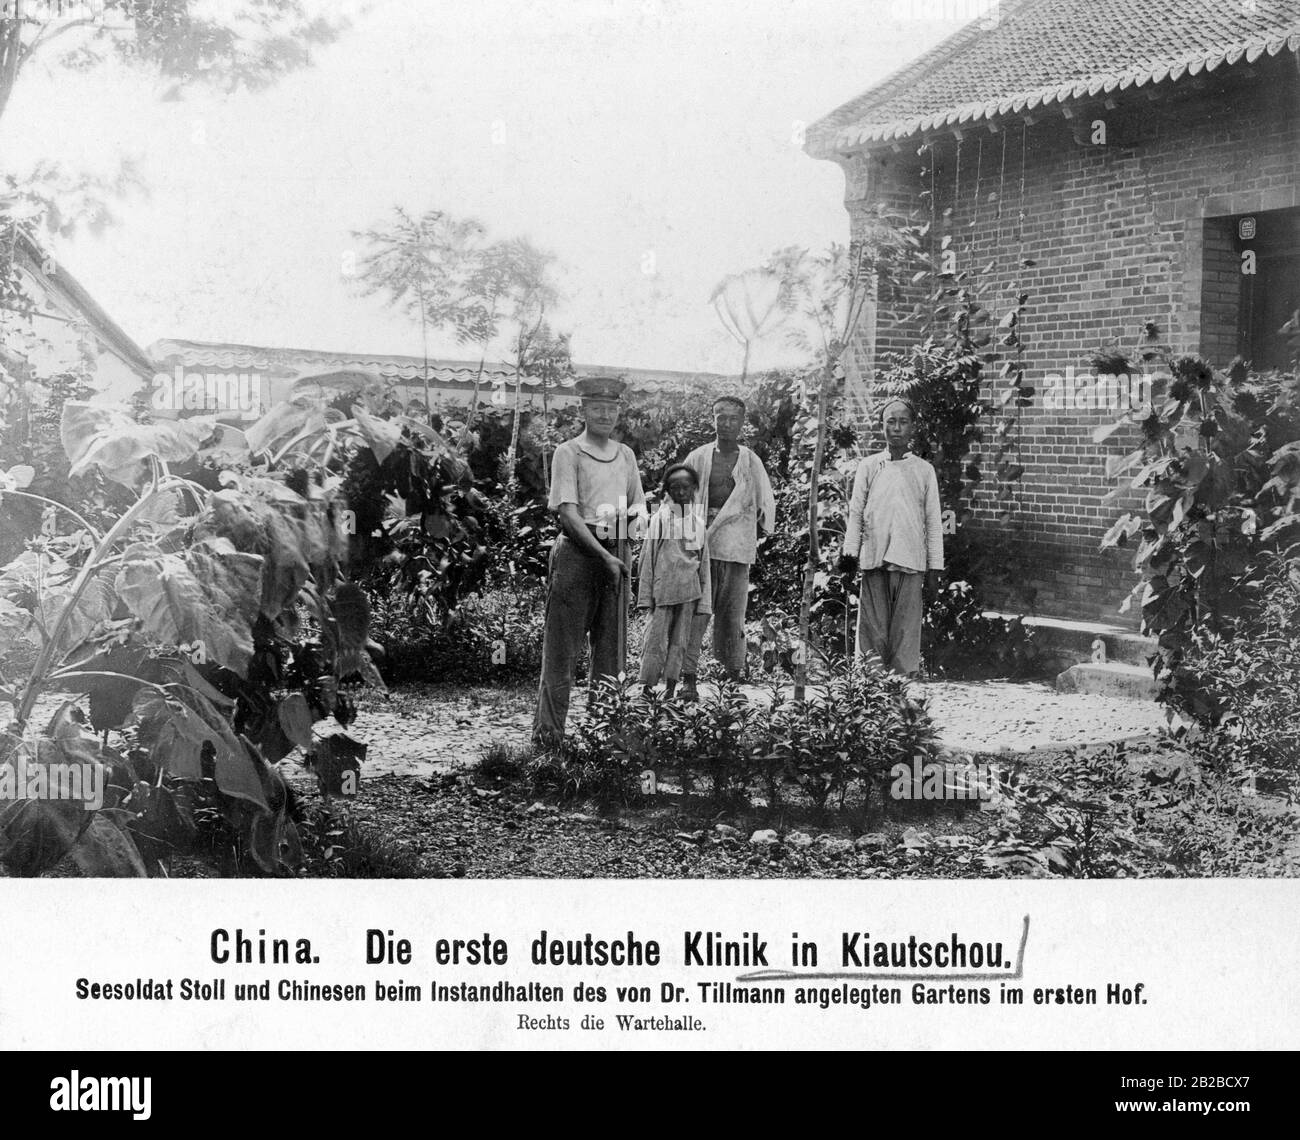 Marine Stoll and Chinese soldiers maintaining the garden laid out by Dr. Tillmann in the first courtyard to the left of the waiting hall of the first German clinic in Kiautschou, Undated photo. Stock Photo